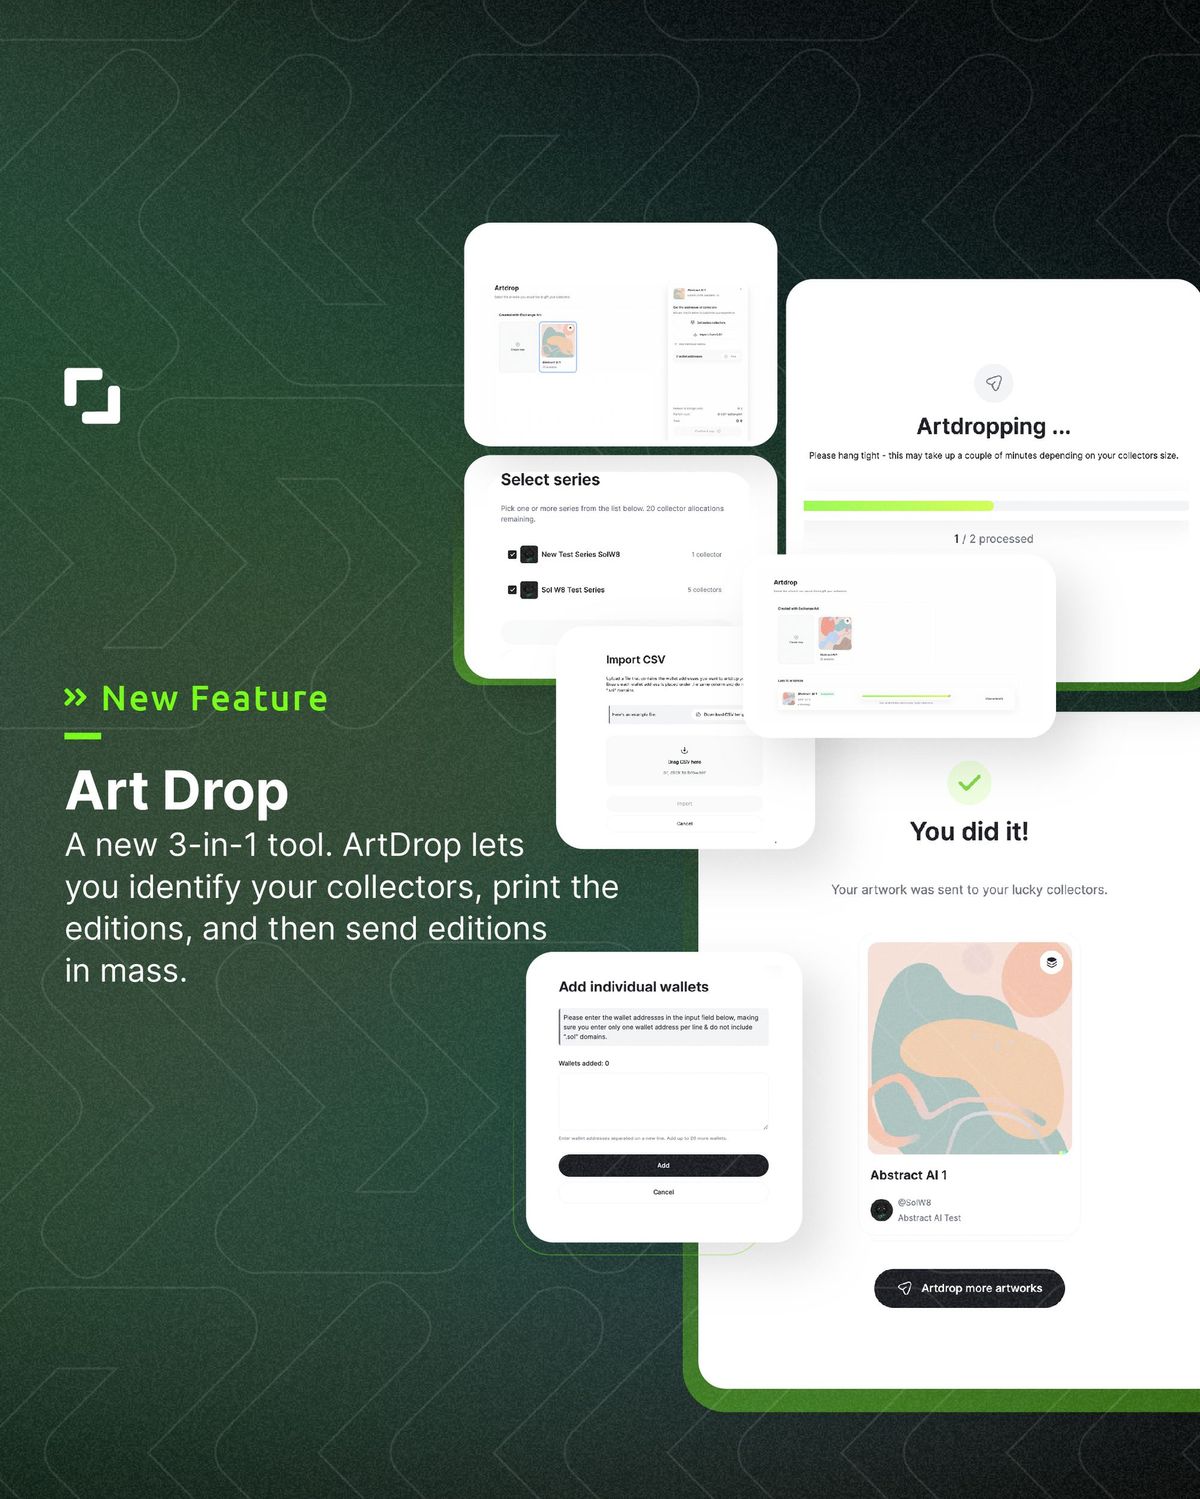 Airdropping made easy. Meet the 3-in-1 ArtDrop tool.